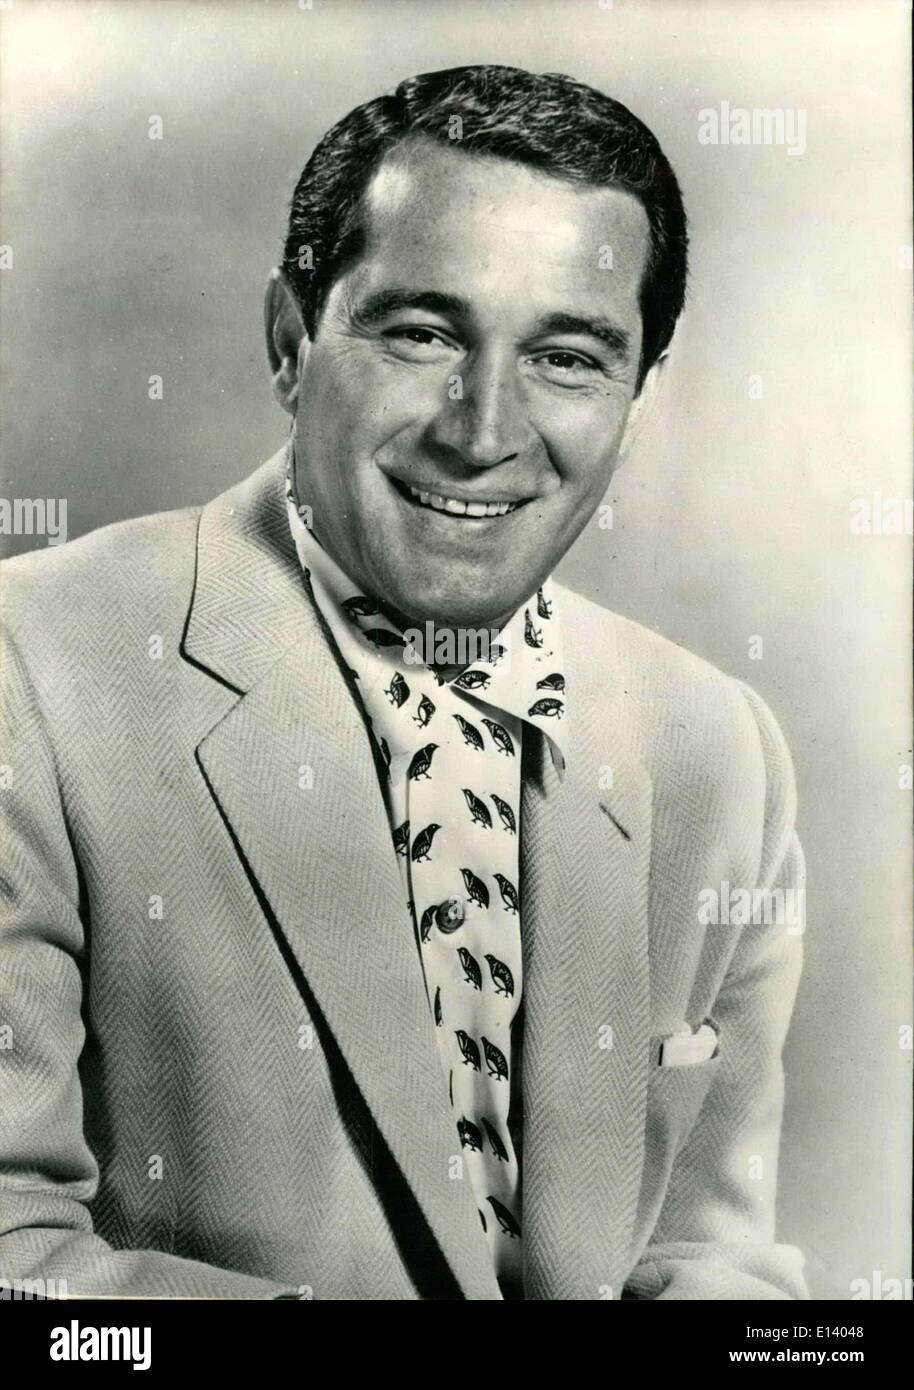 Mar. 31, 2012 - An American Singer to Win 5 Million on TV. An American Singer, Perry Como, signed a contract for 5 Million for a 104 week TV program with an important Dairy Products Company. It is the most important contract ever to be signed by US TV. OPS: The American singer Perry Como. Stock Photo